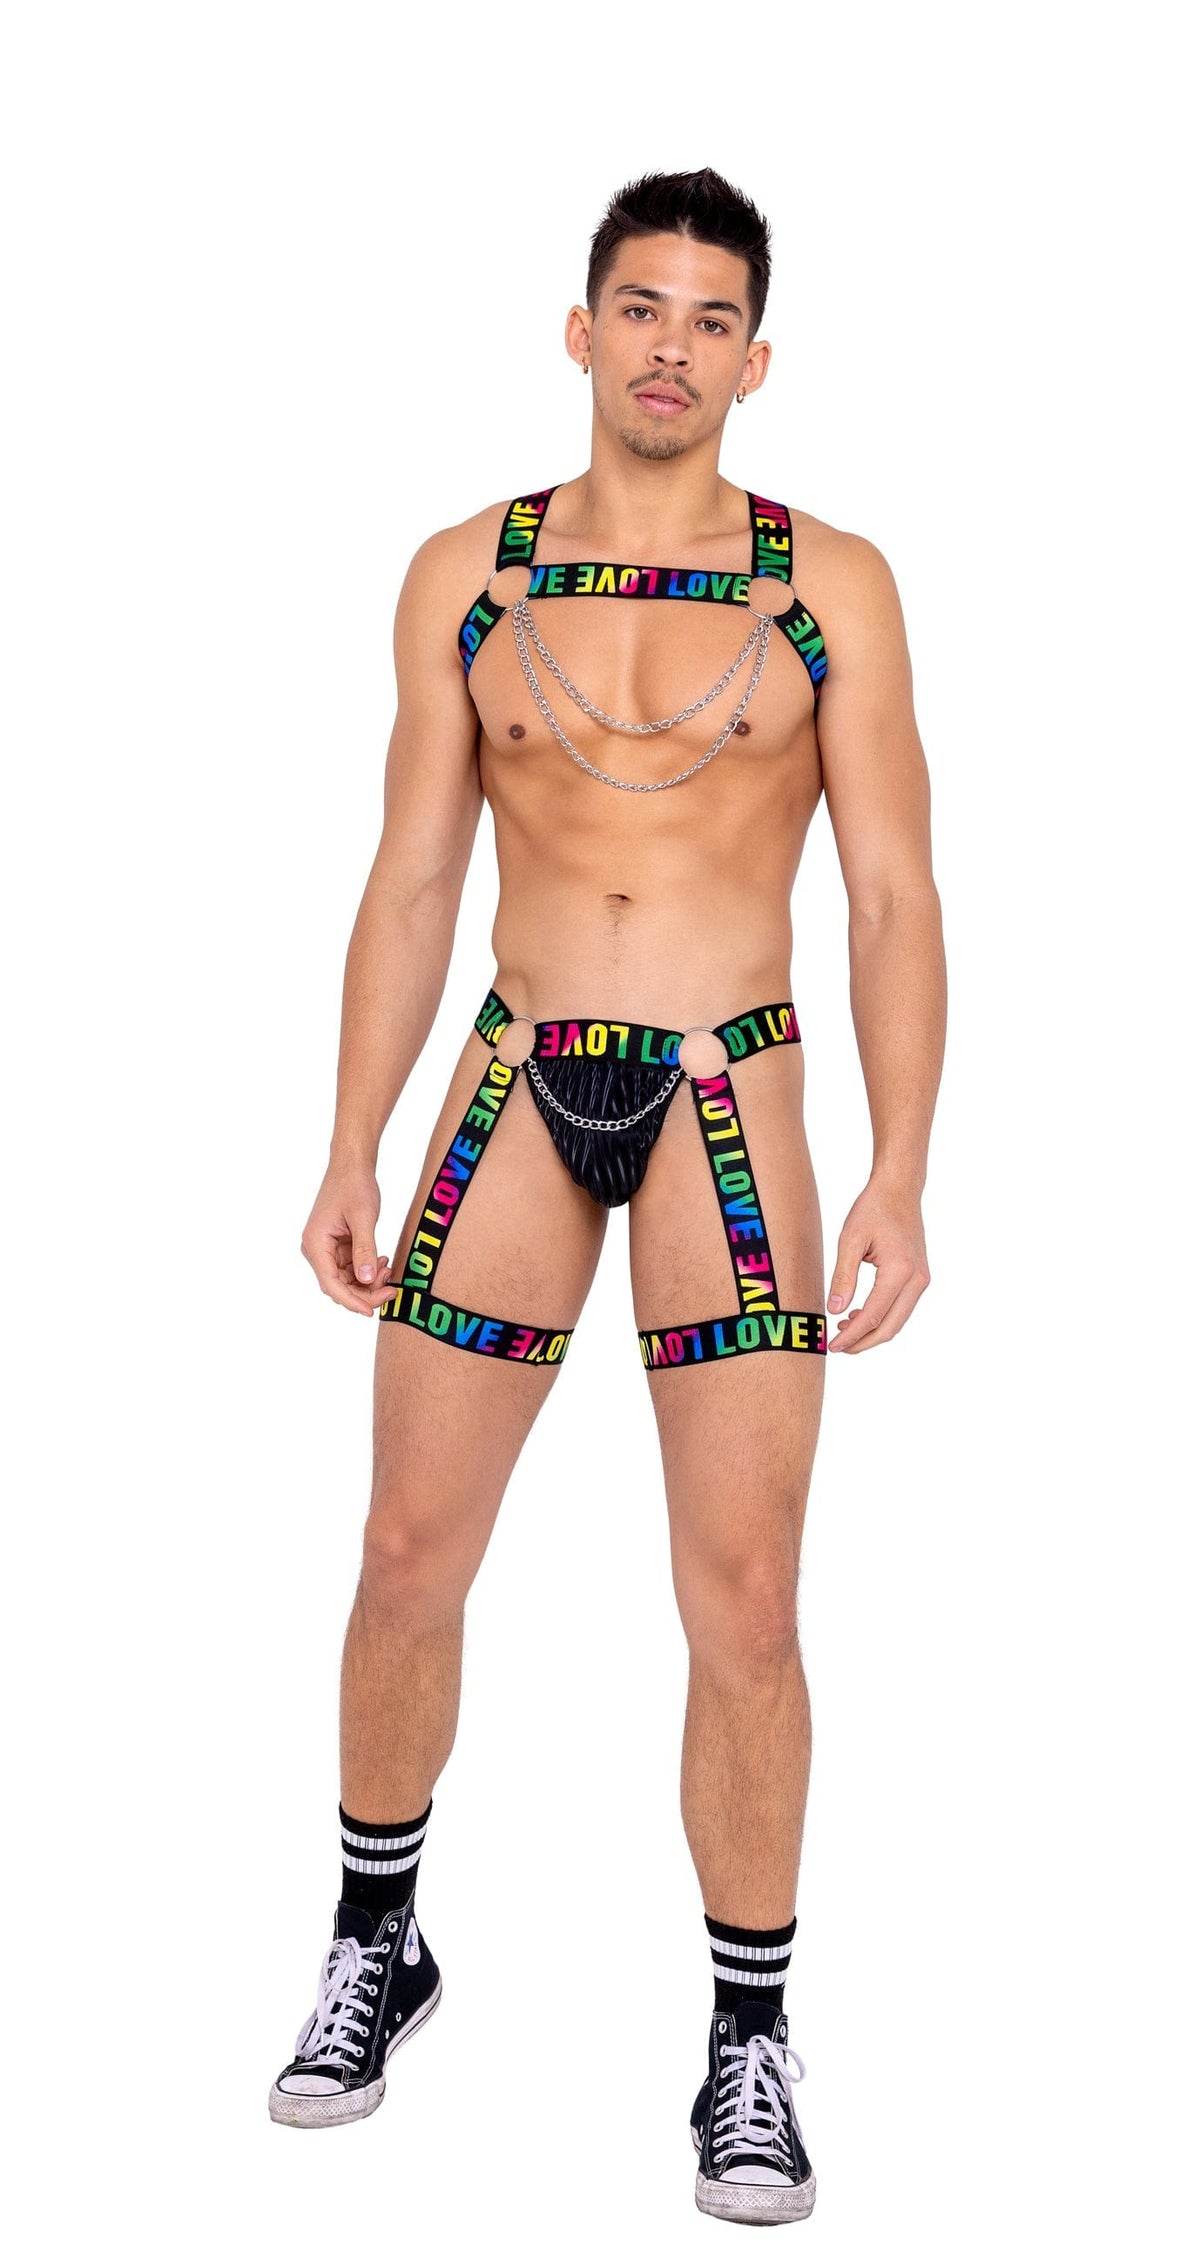 Roma Small / Black Black Men’s Pride Attached Garters &amp; Chain Detail Thong 6158-Blk/Multi-S 2022 Black Men’s Pride Attached Garters Chain Detail Thong Ravewear Apparel &amp; Accessories &gt; Clothing &gt; Shirts &amp; Tops